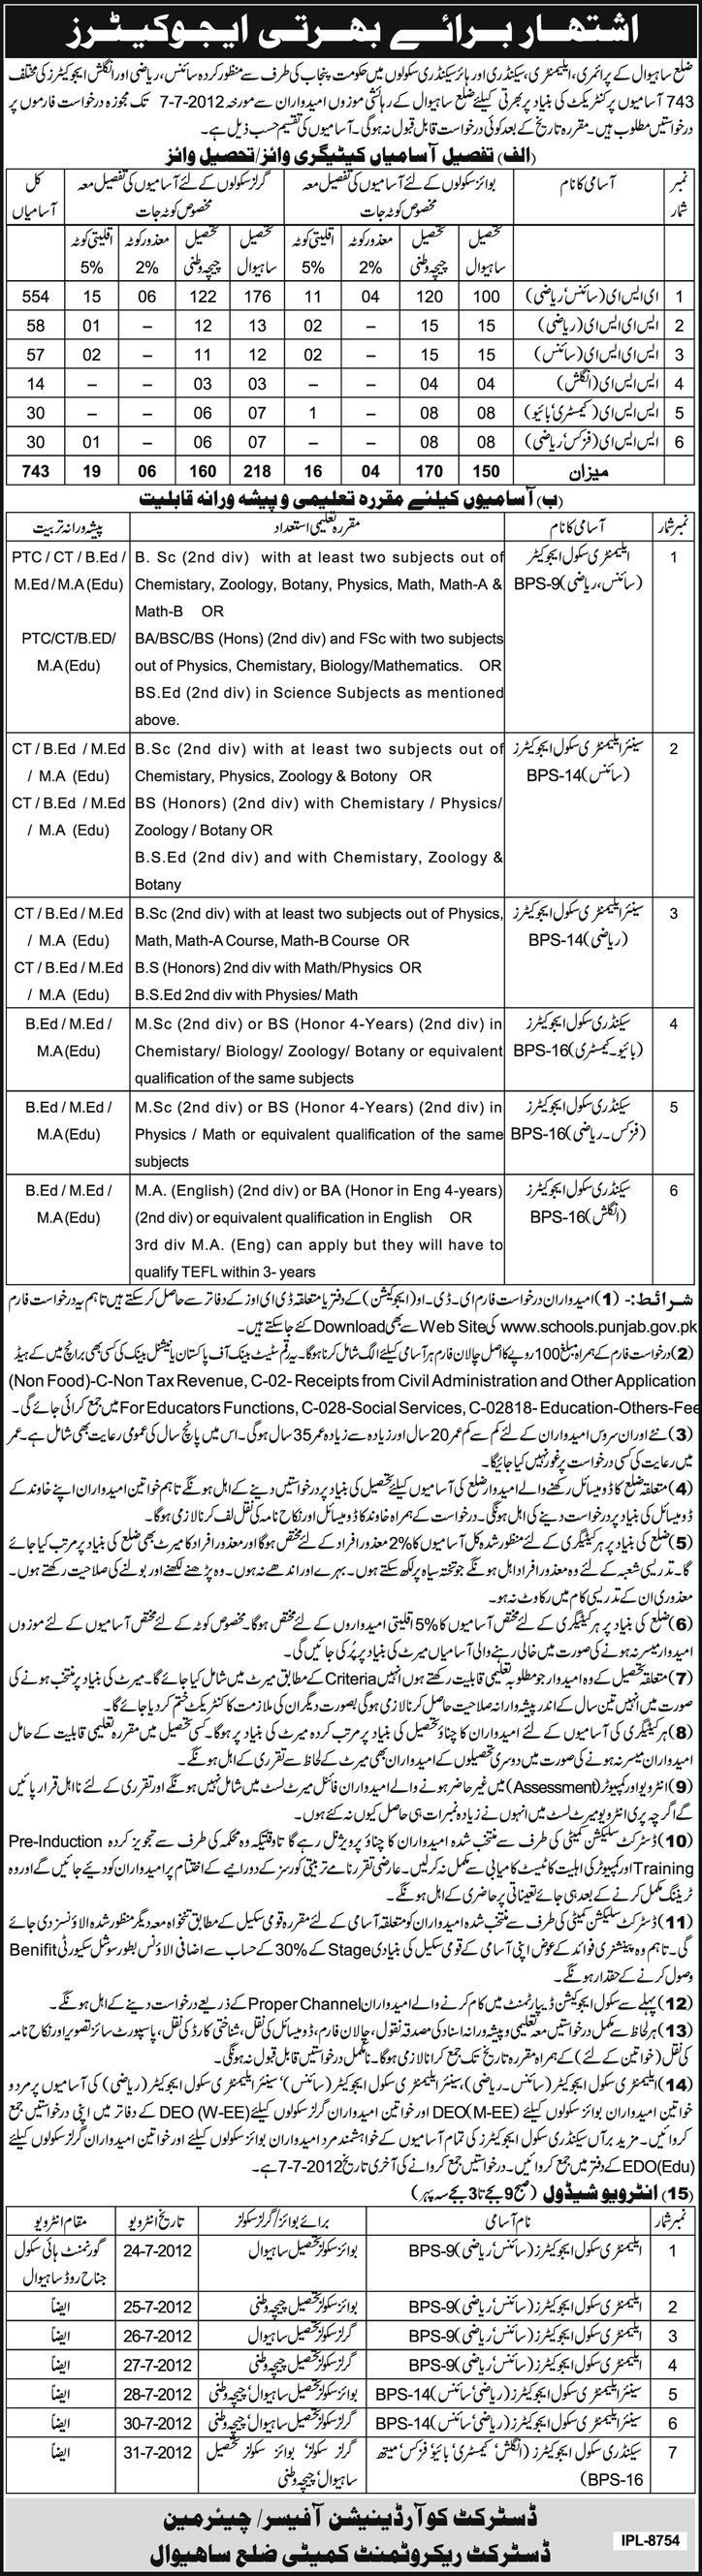 Teachers/Educators Required by Government of Punjab at Primary, Elementary, Secondary and Higher Secondary Schools (Sahiwal District) (441 Vacancies) (Govt. Job)